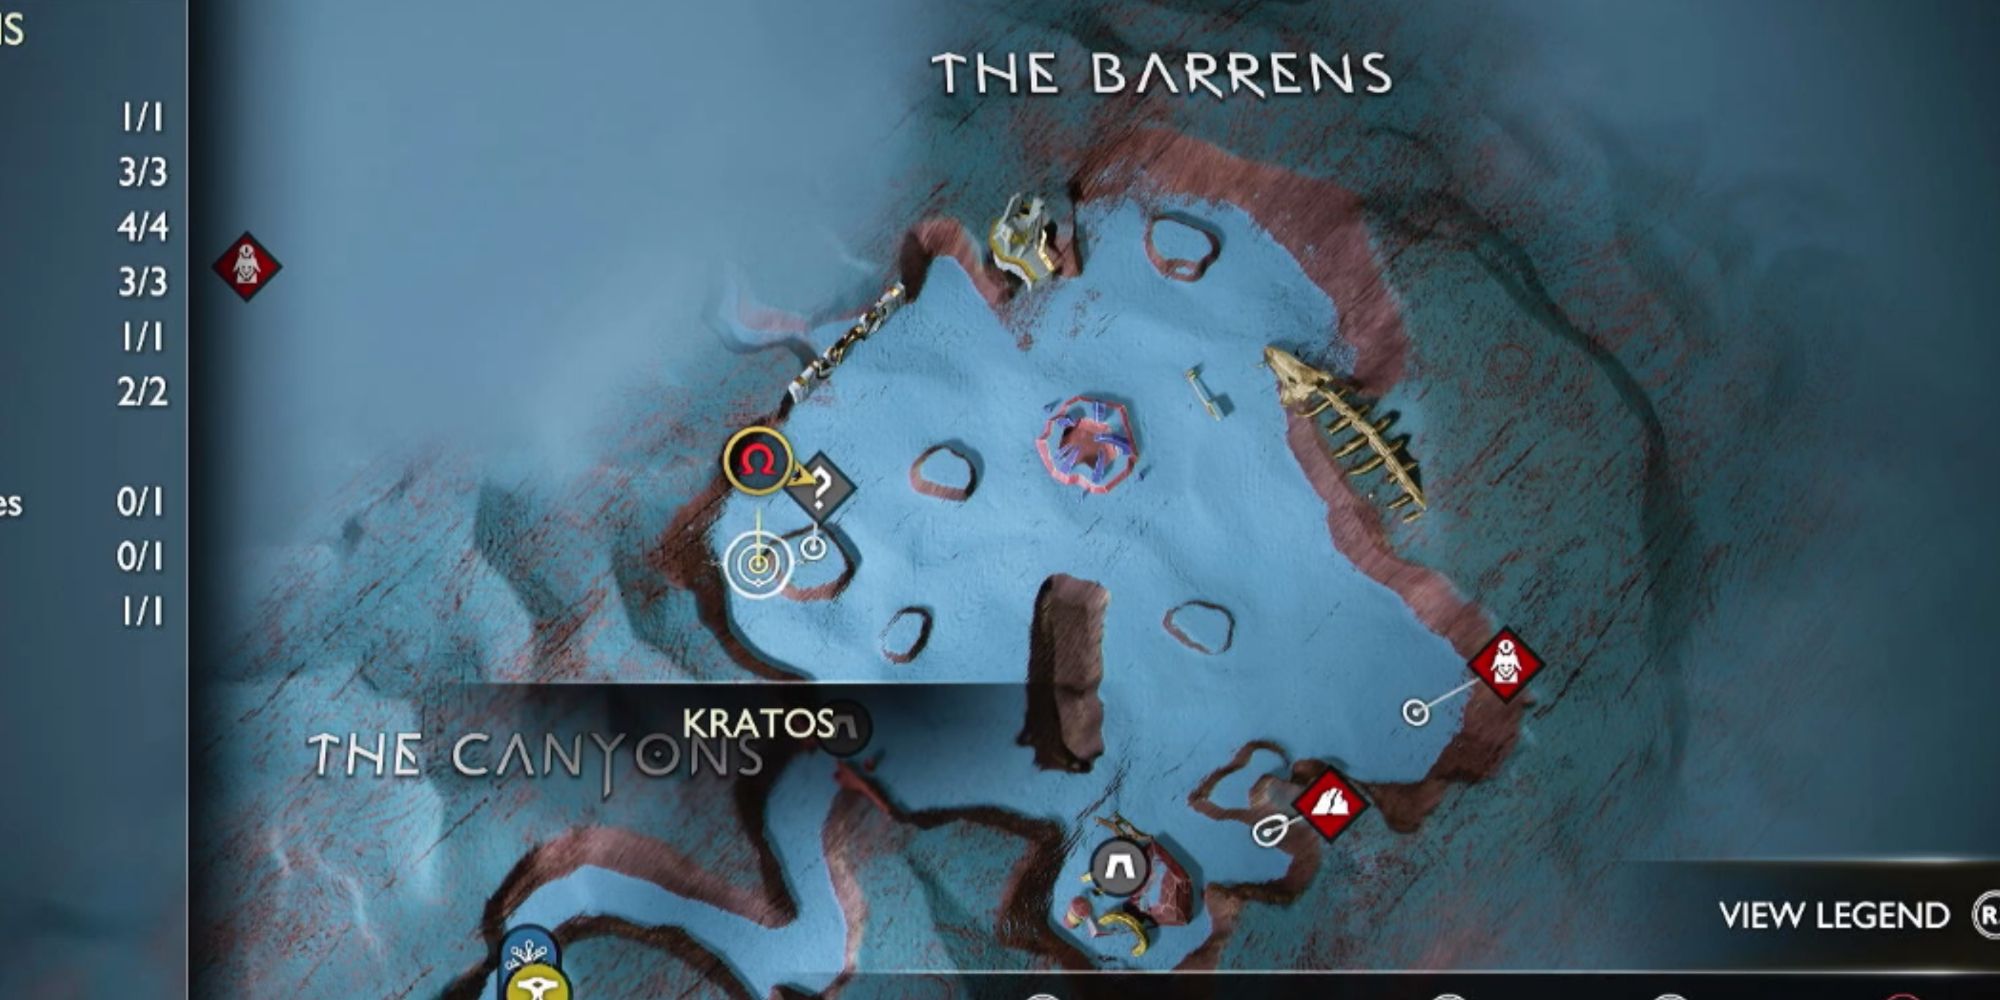 The image showing map of The Barrens. 